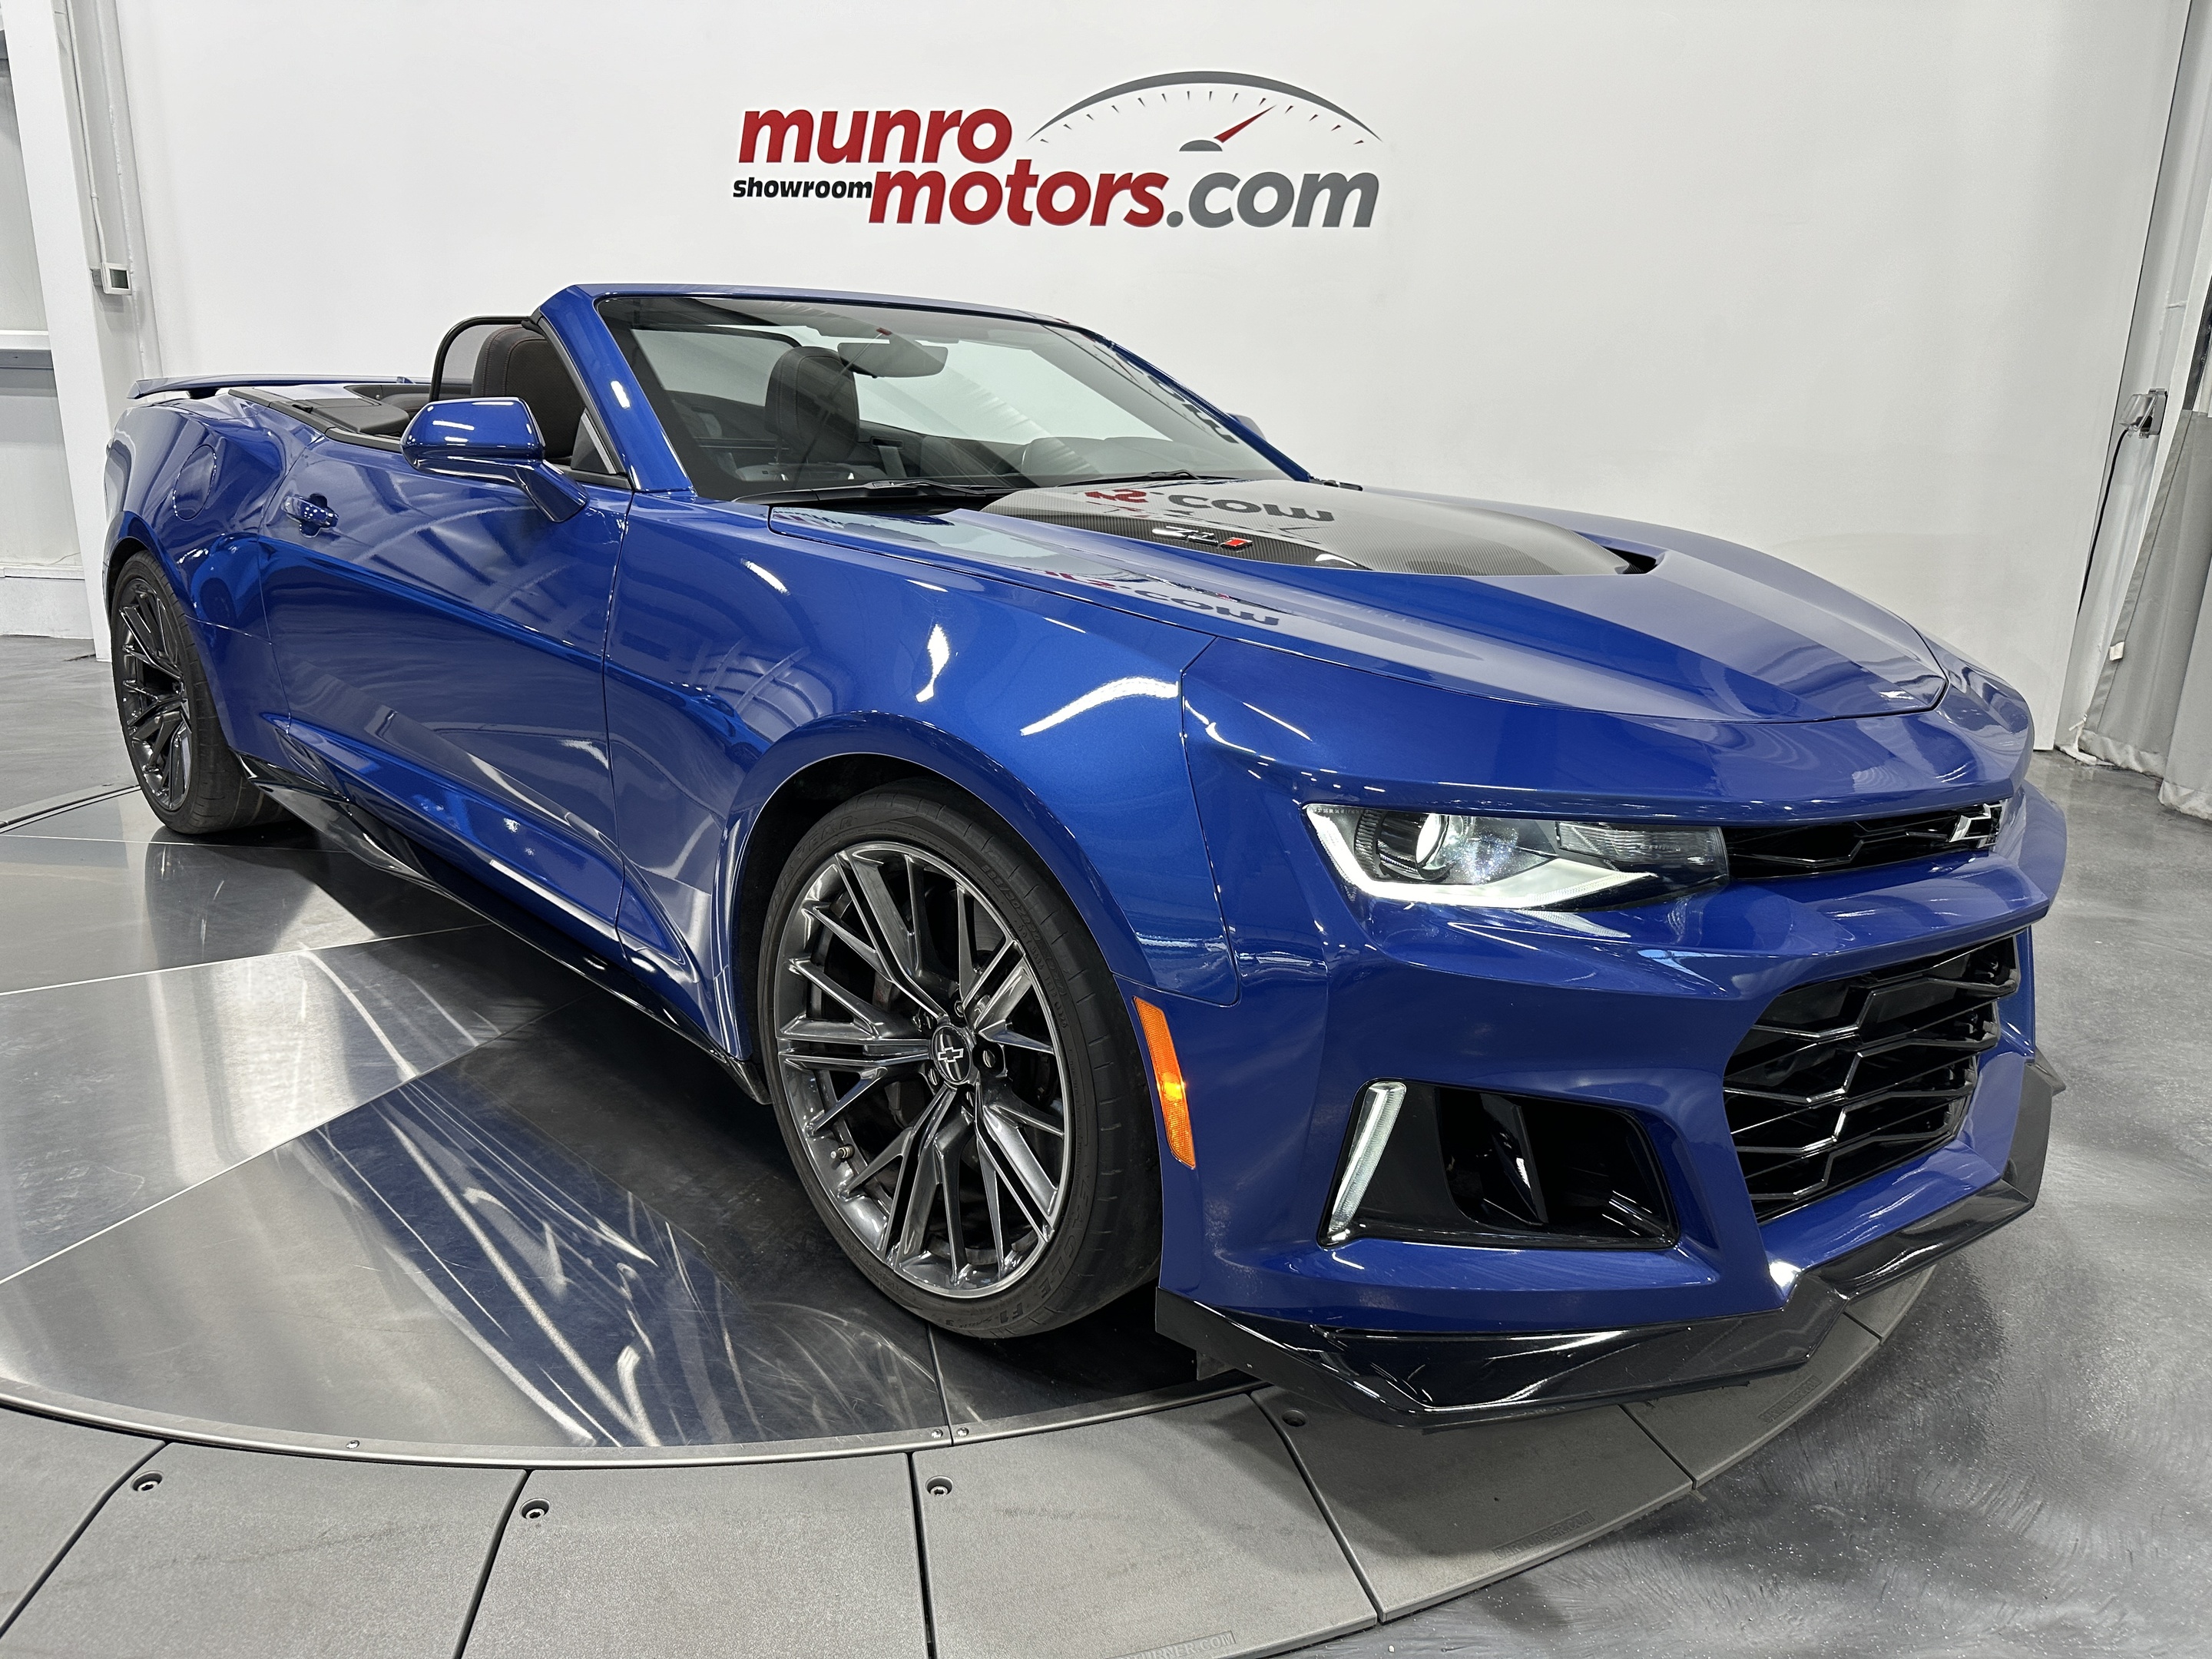 2021 Chevrolet Camaro ZL1 Convertible Supercharged 650hp Auto